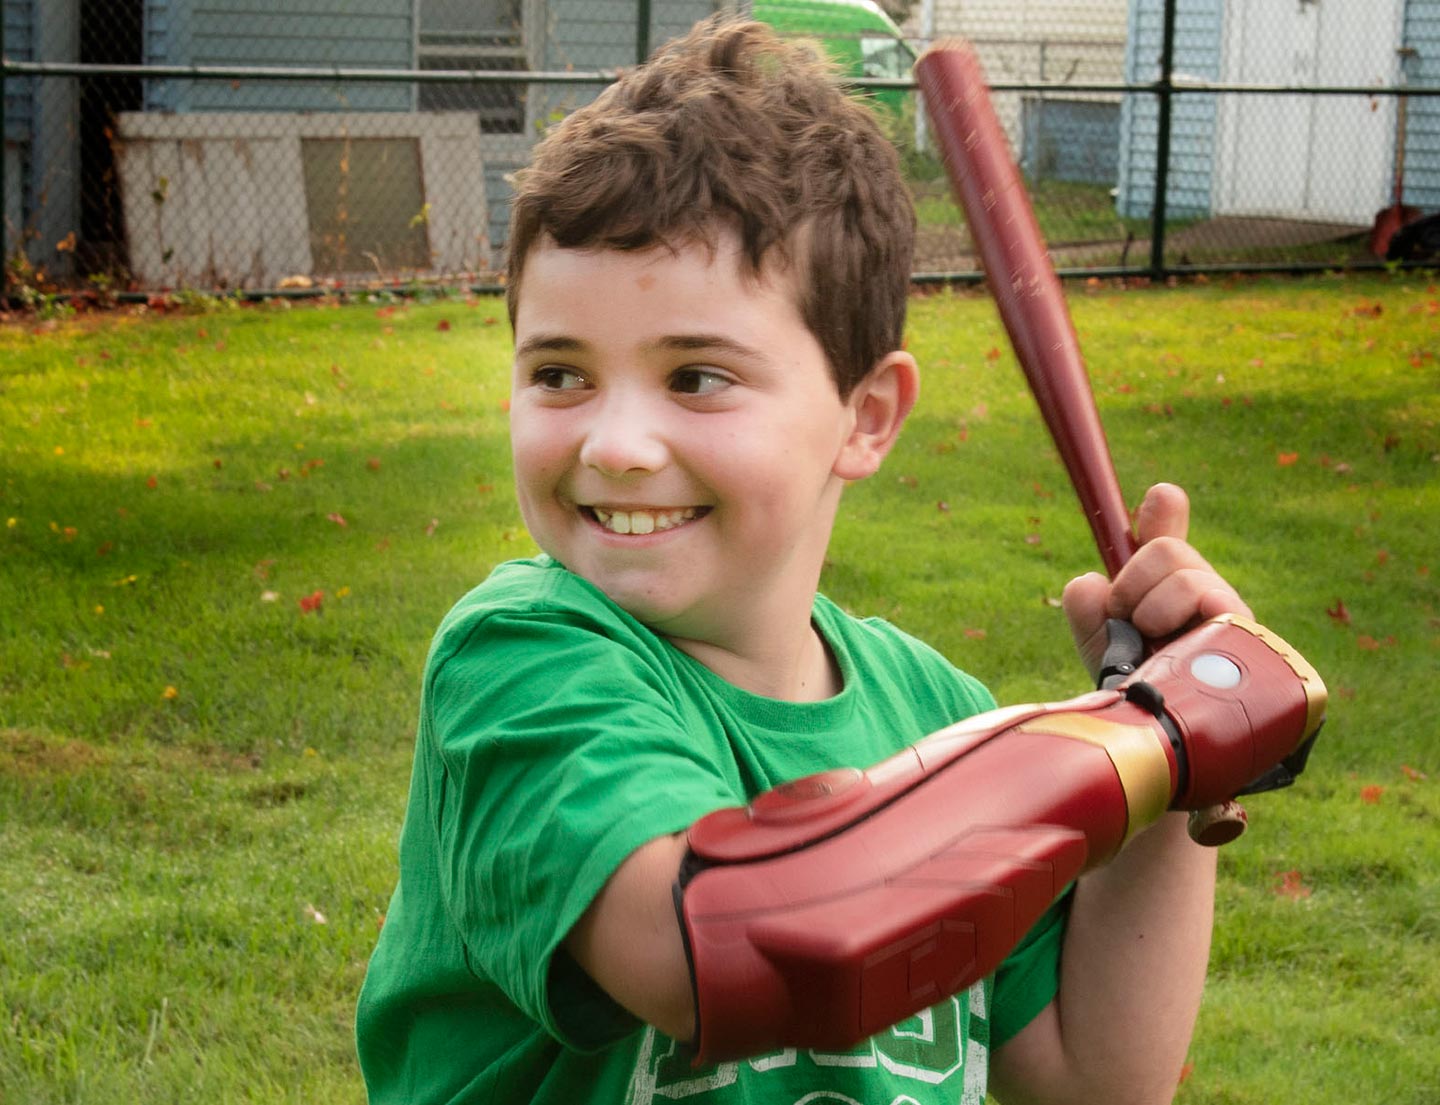 patient with prosthetic arm playing baseball